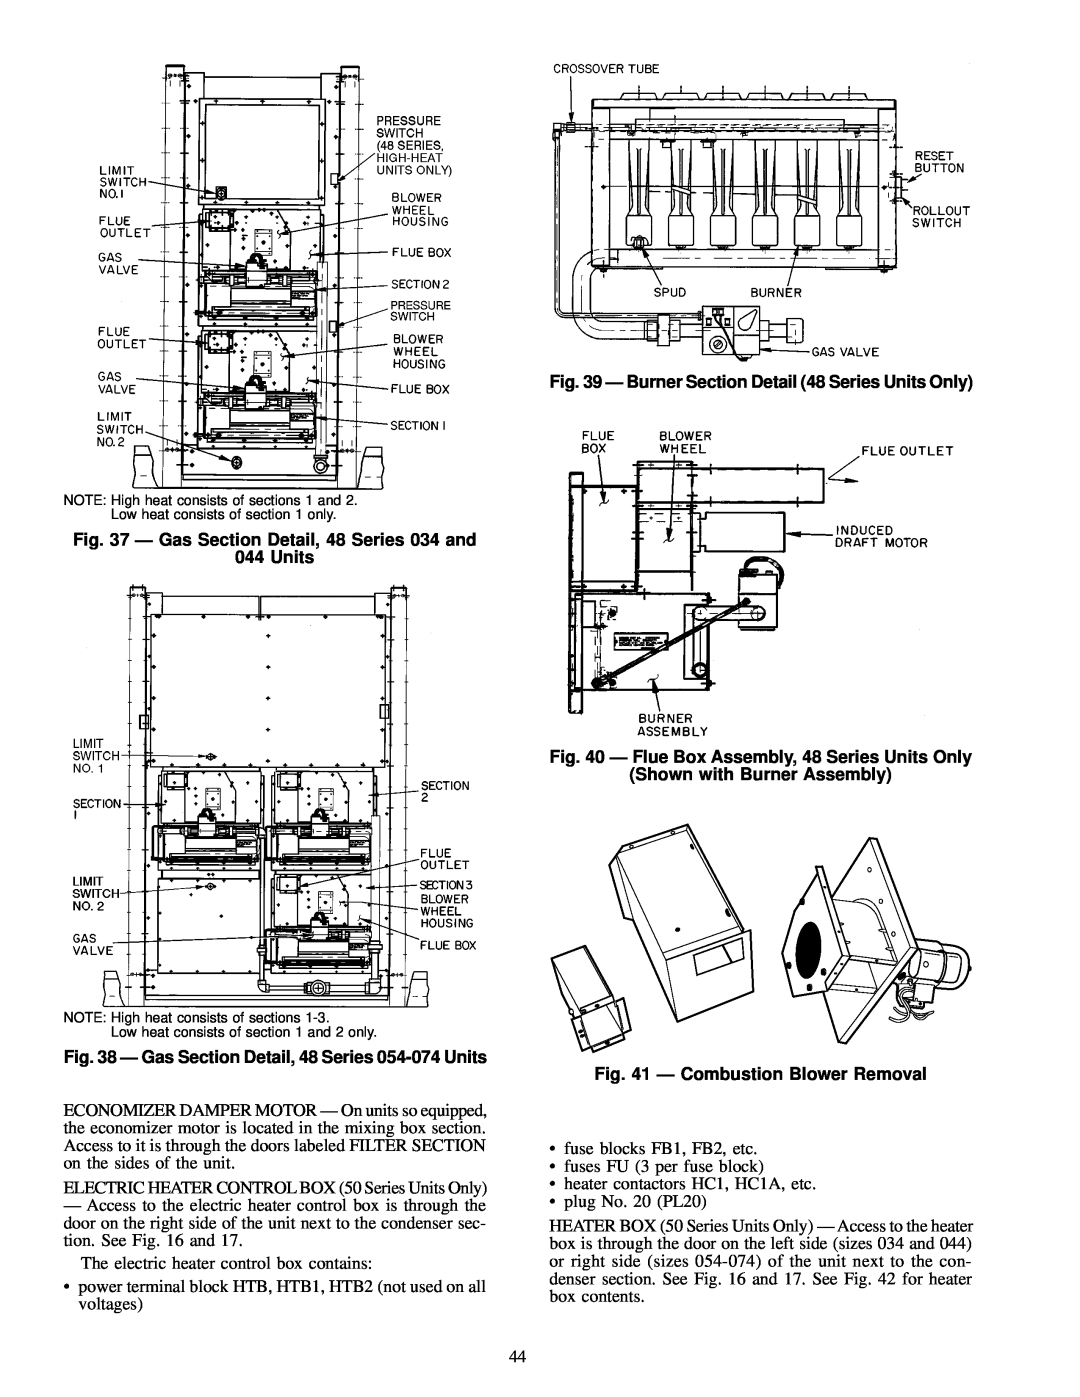 Carrier NP034-074 specifications Ð Gas Section Detail, 48 Series 034 and, Ð Flue Box Assembly, 48 Series Units Only 